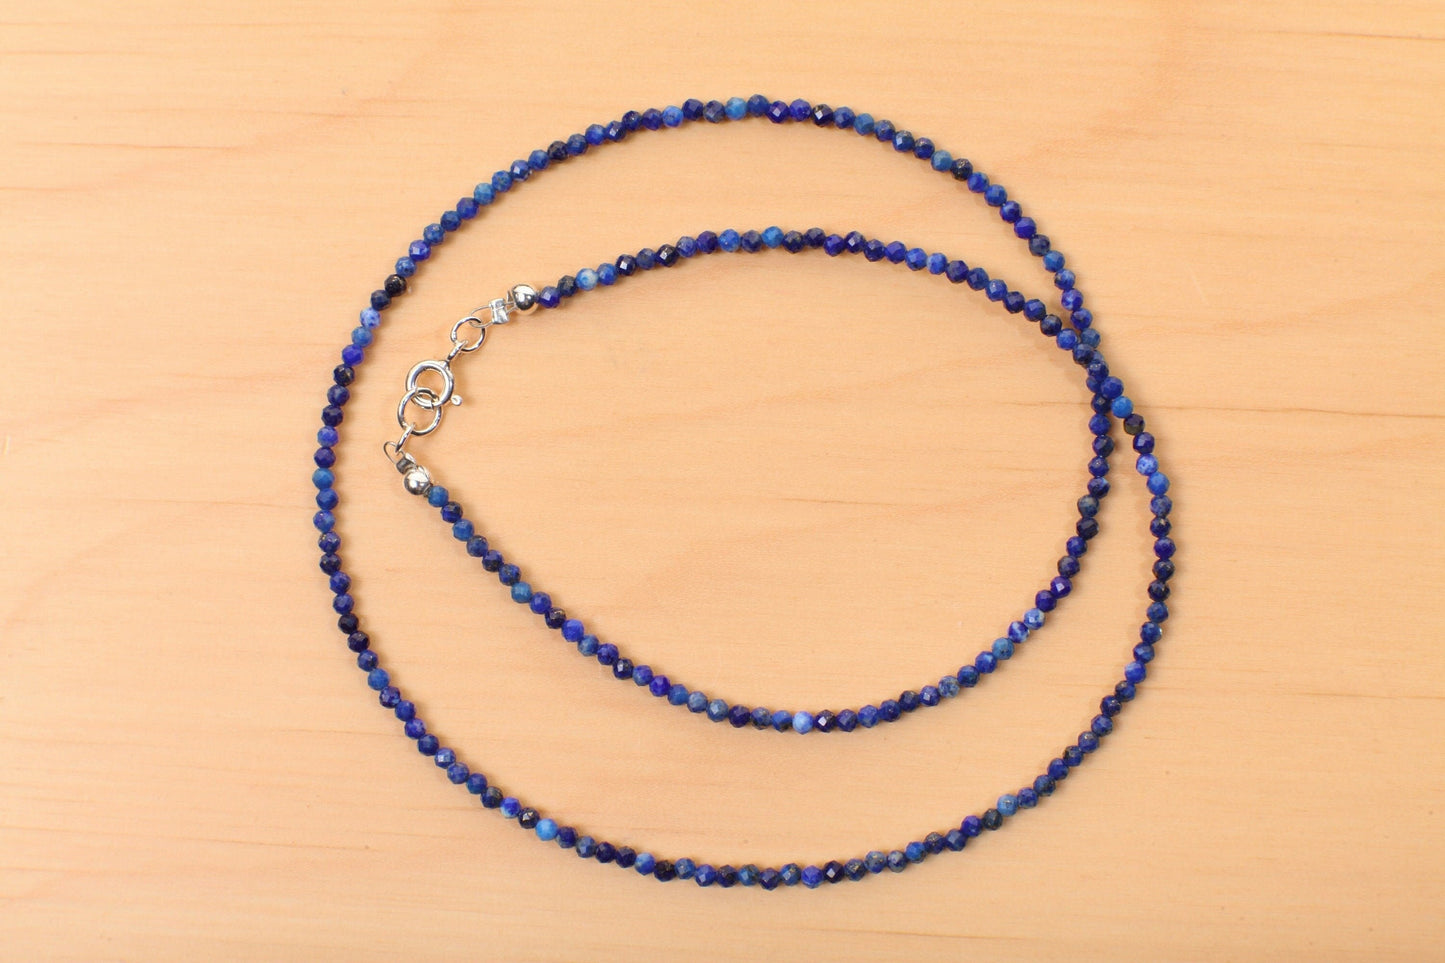 2-3mm Faceted Lapis Lazuli, Green Onyx, Garnet, Bamboo Coral Layering Choker 925 Sterling Silver Necklace, Precious Gemstone